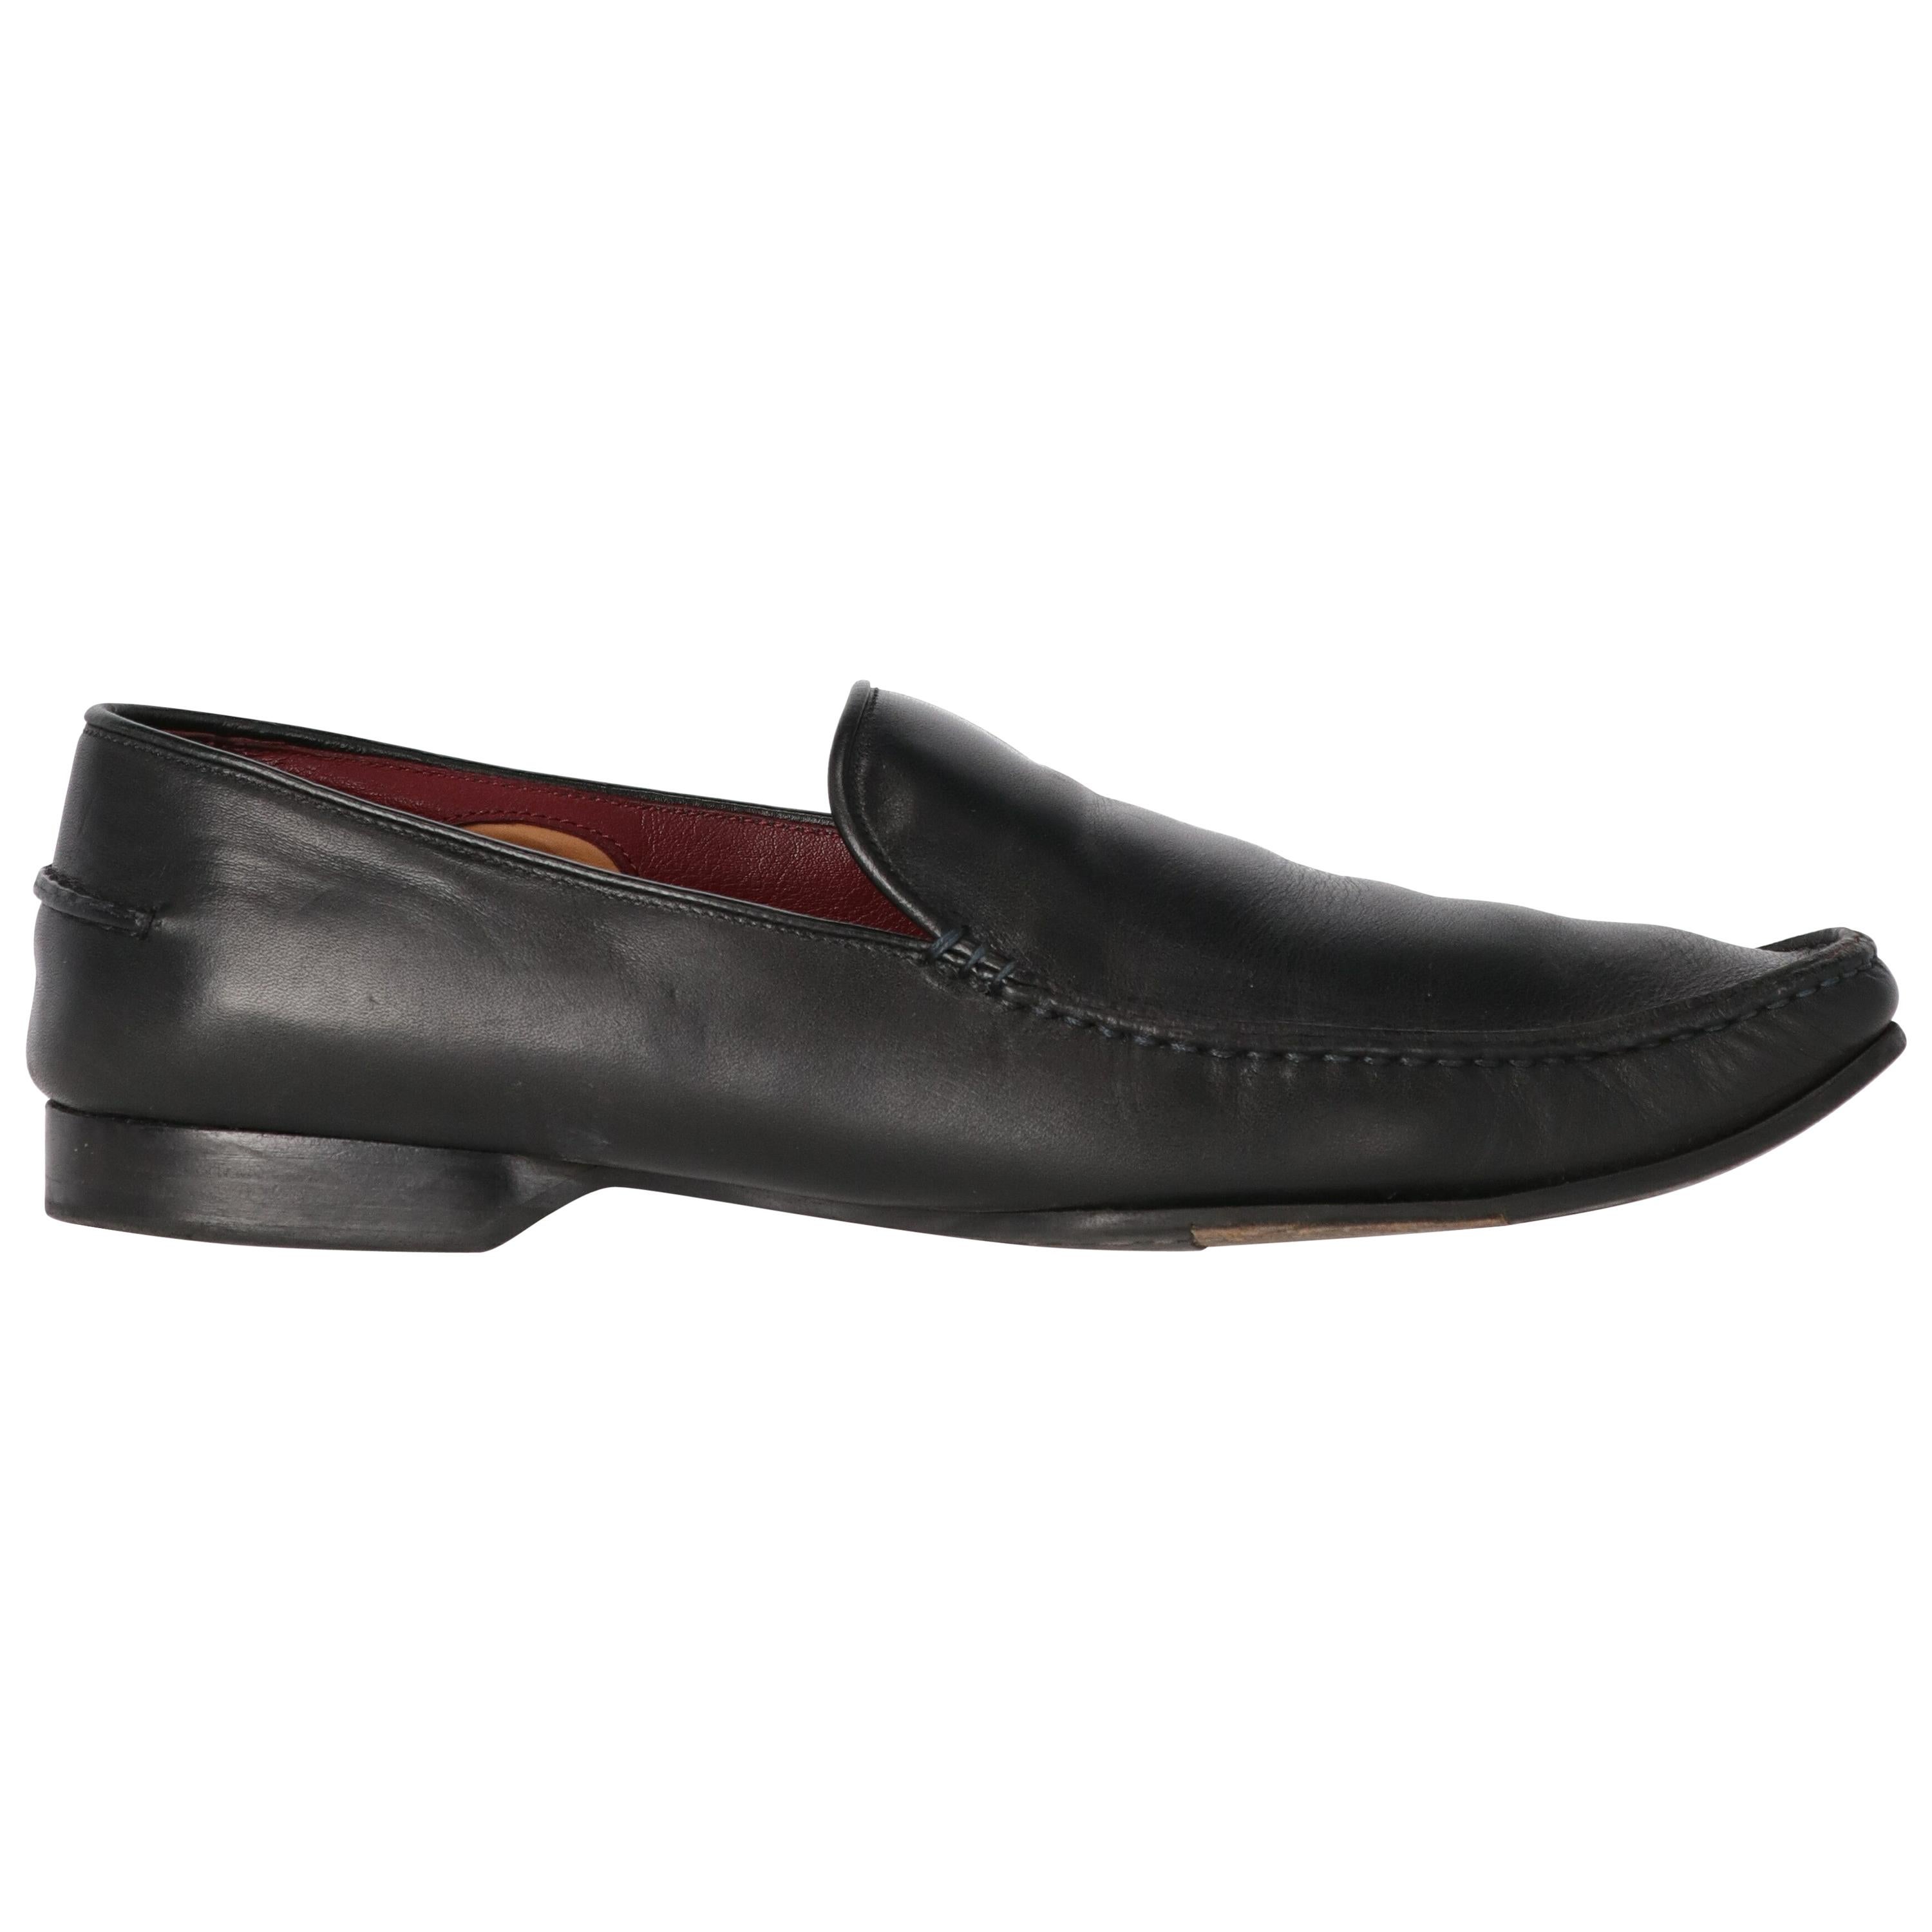 2000s Gianfranco Ferré Black Leather Loafers For Sale